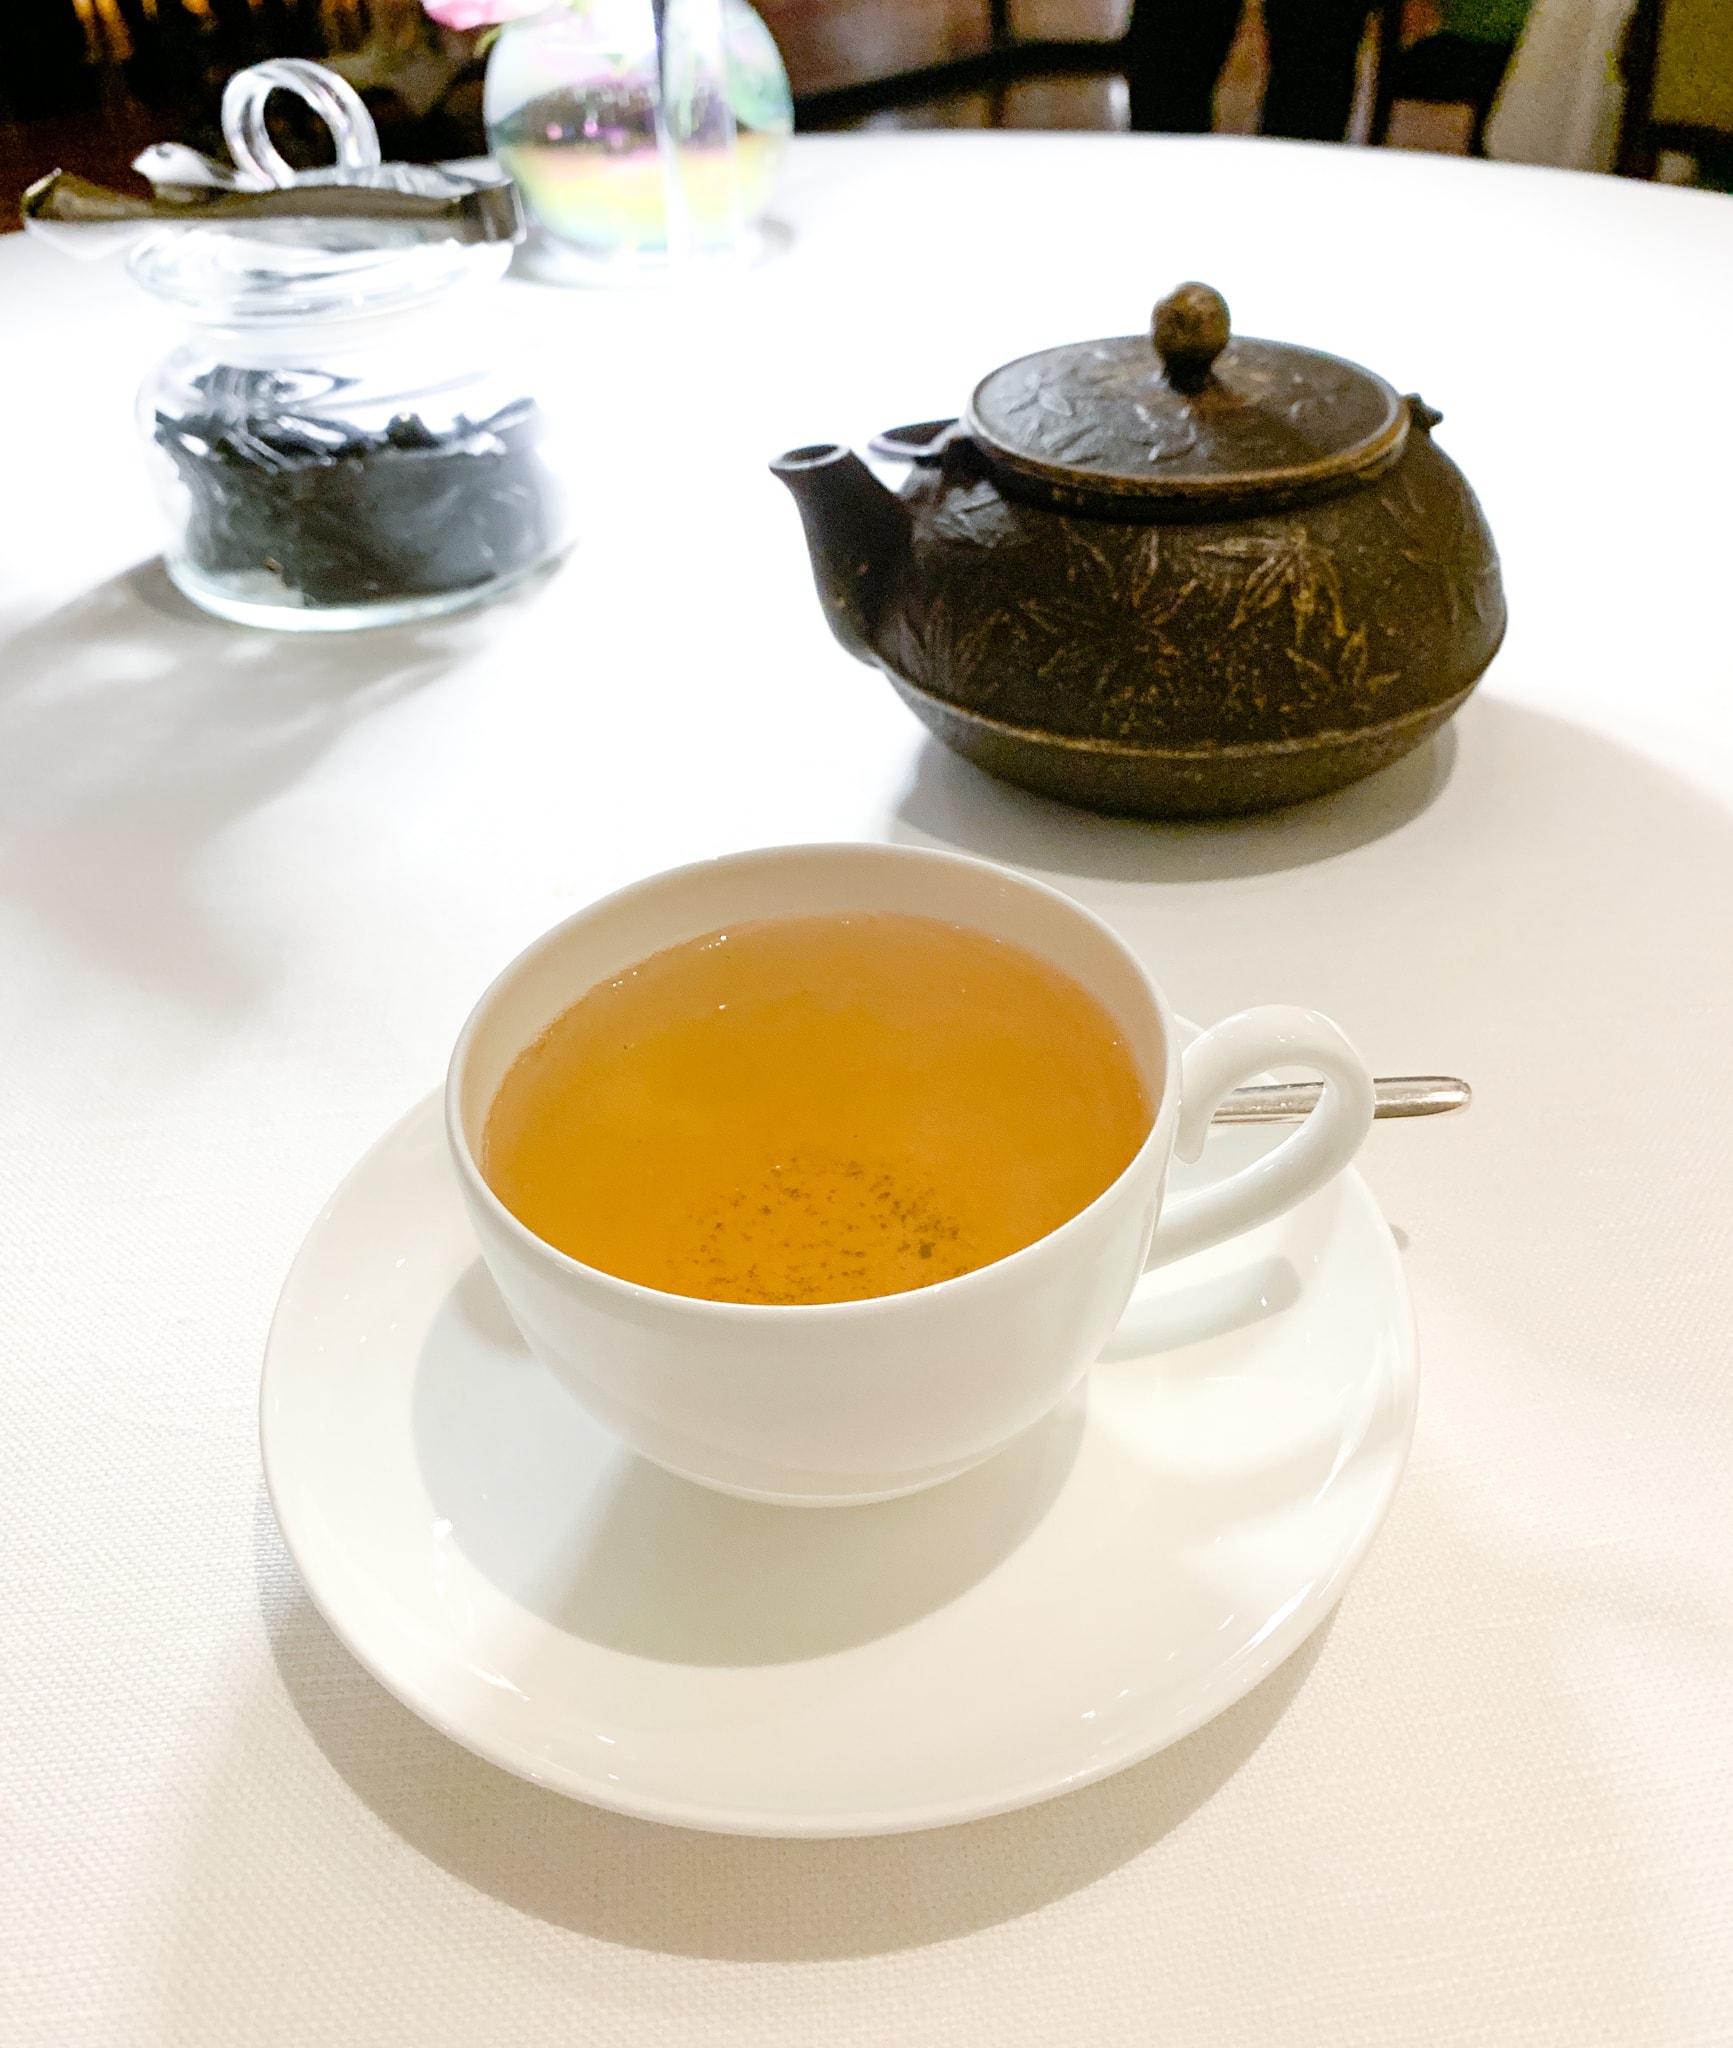 Japanese green tea and black licorice at I Portici Restaurant in Bologna, Italy